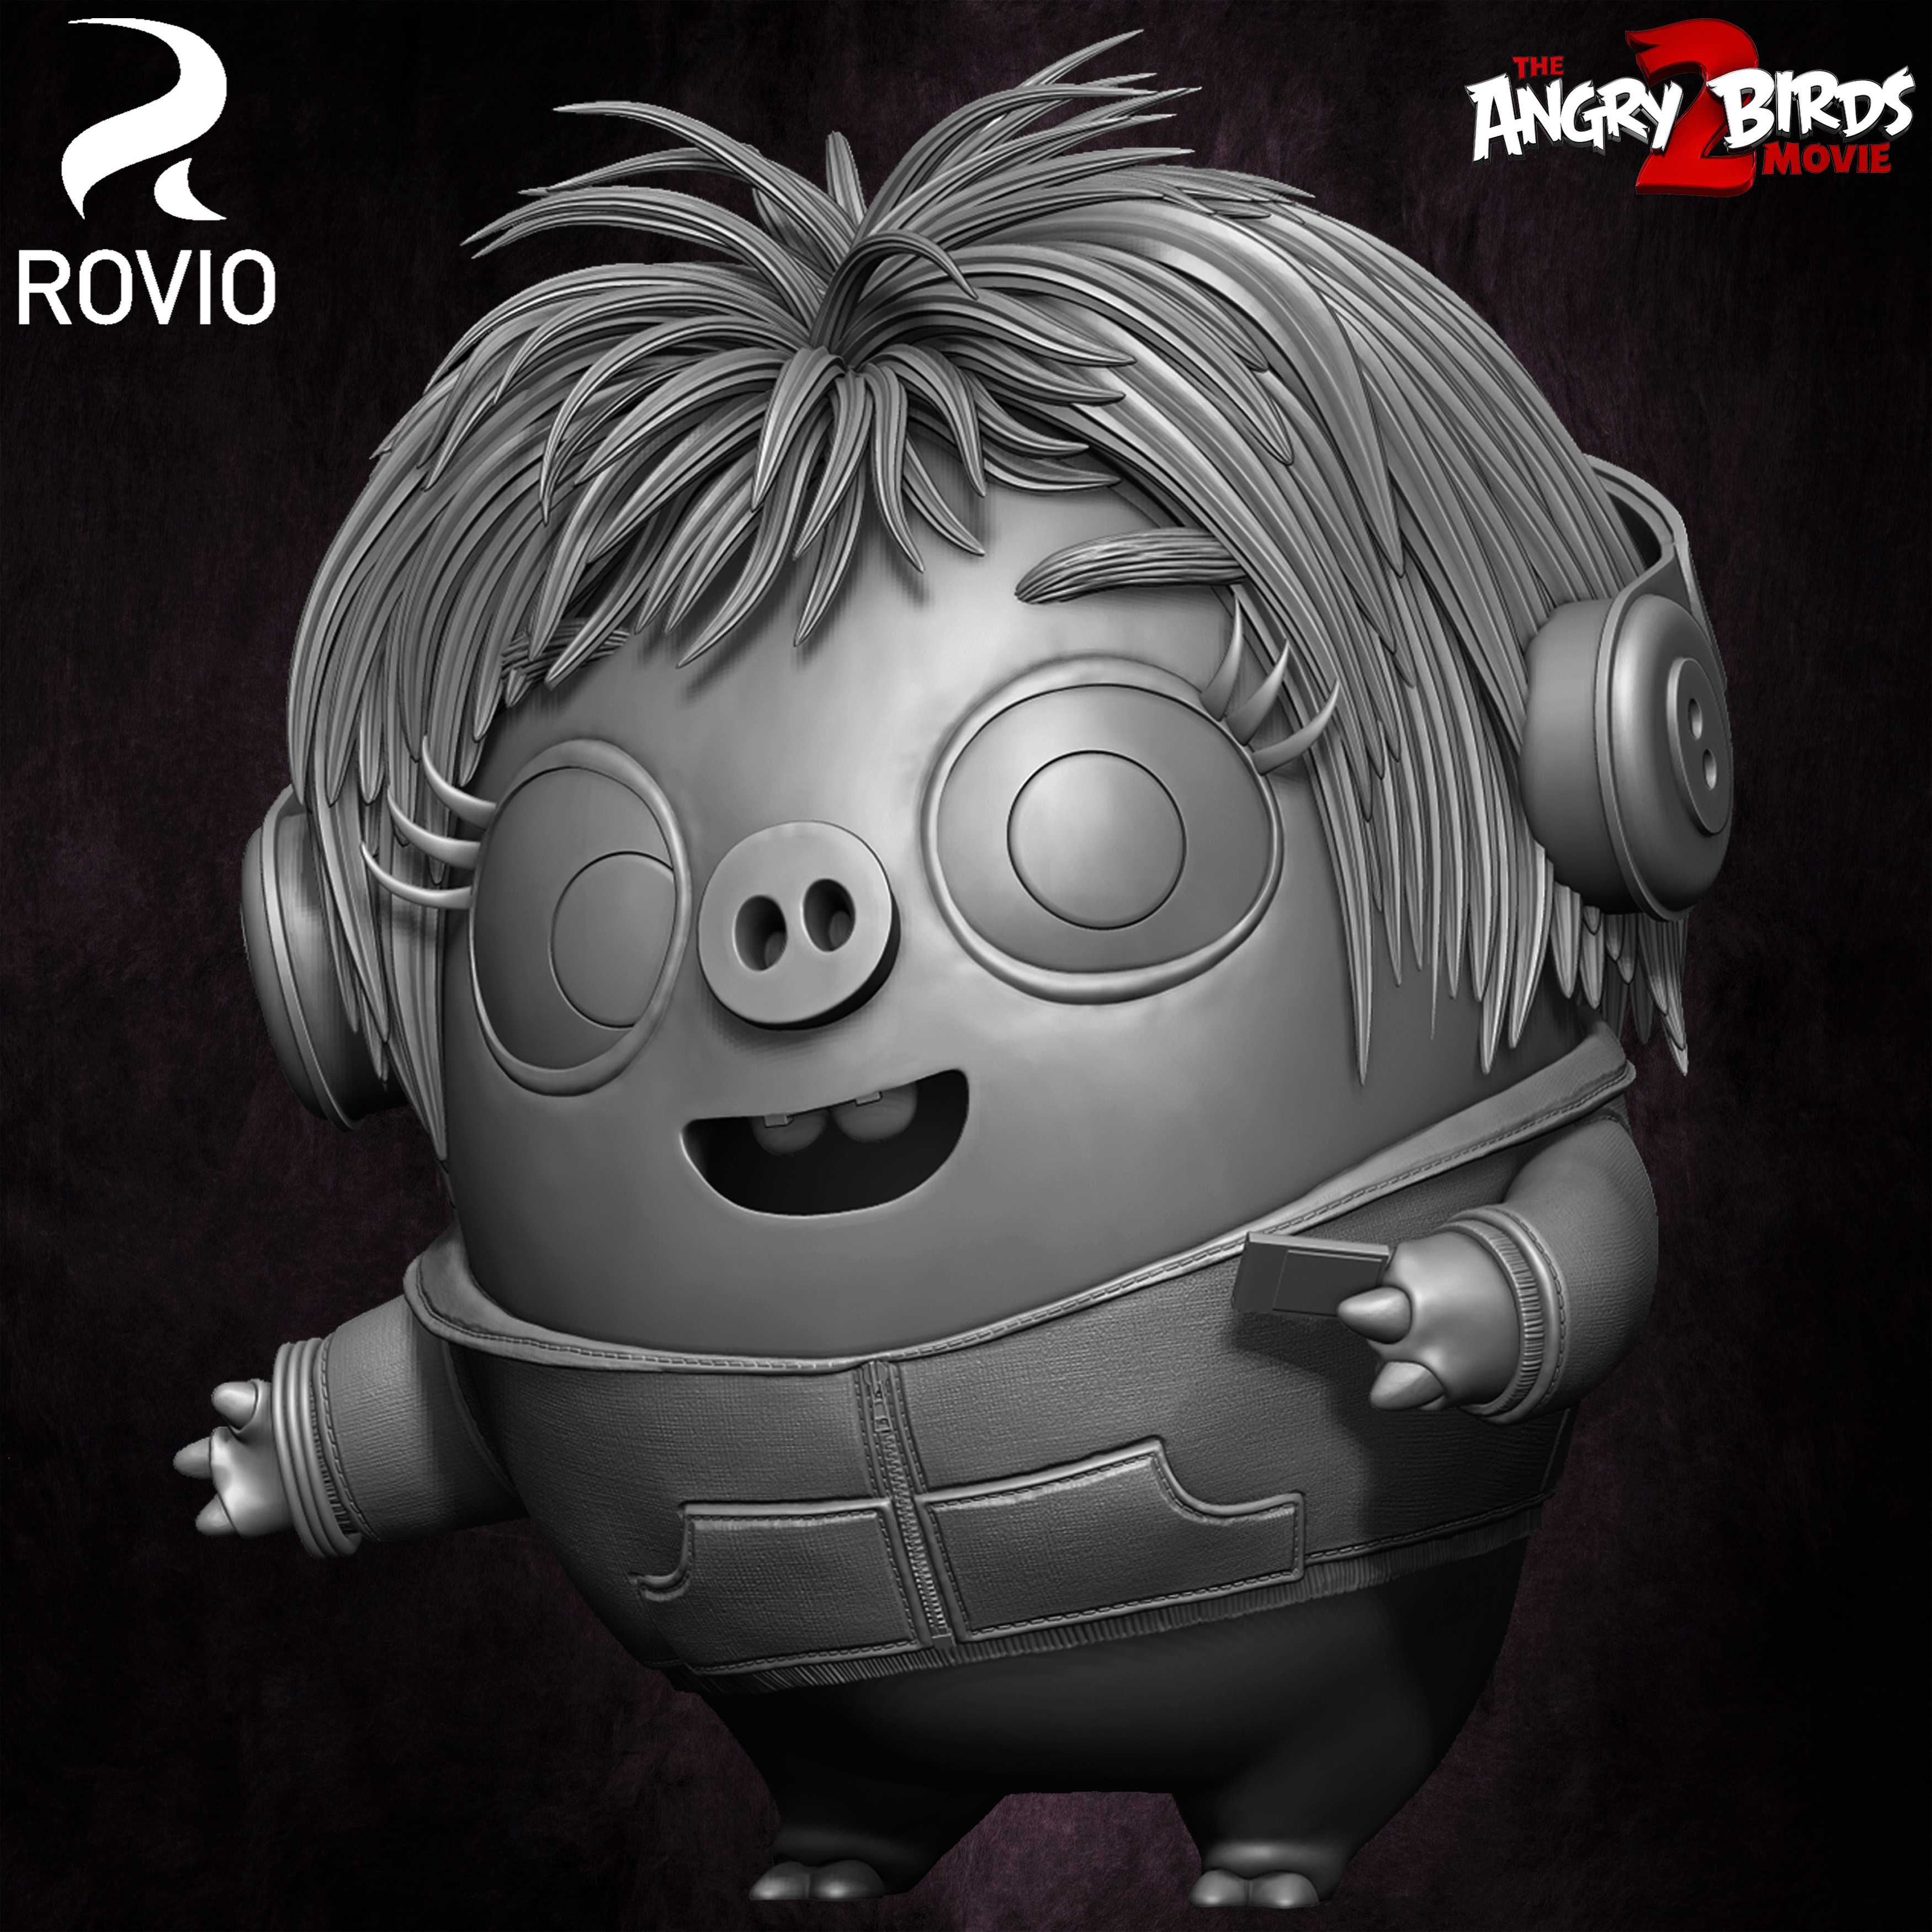 Courtney Angry Birds Mouvie 2 Rovio Entertainment 3D Model sculpted By Yacine BRINIS 001